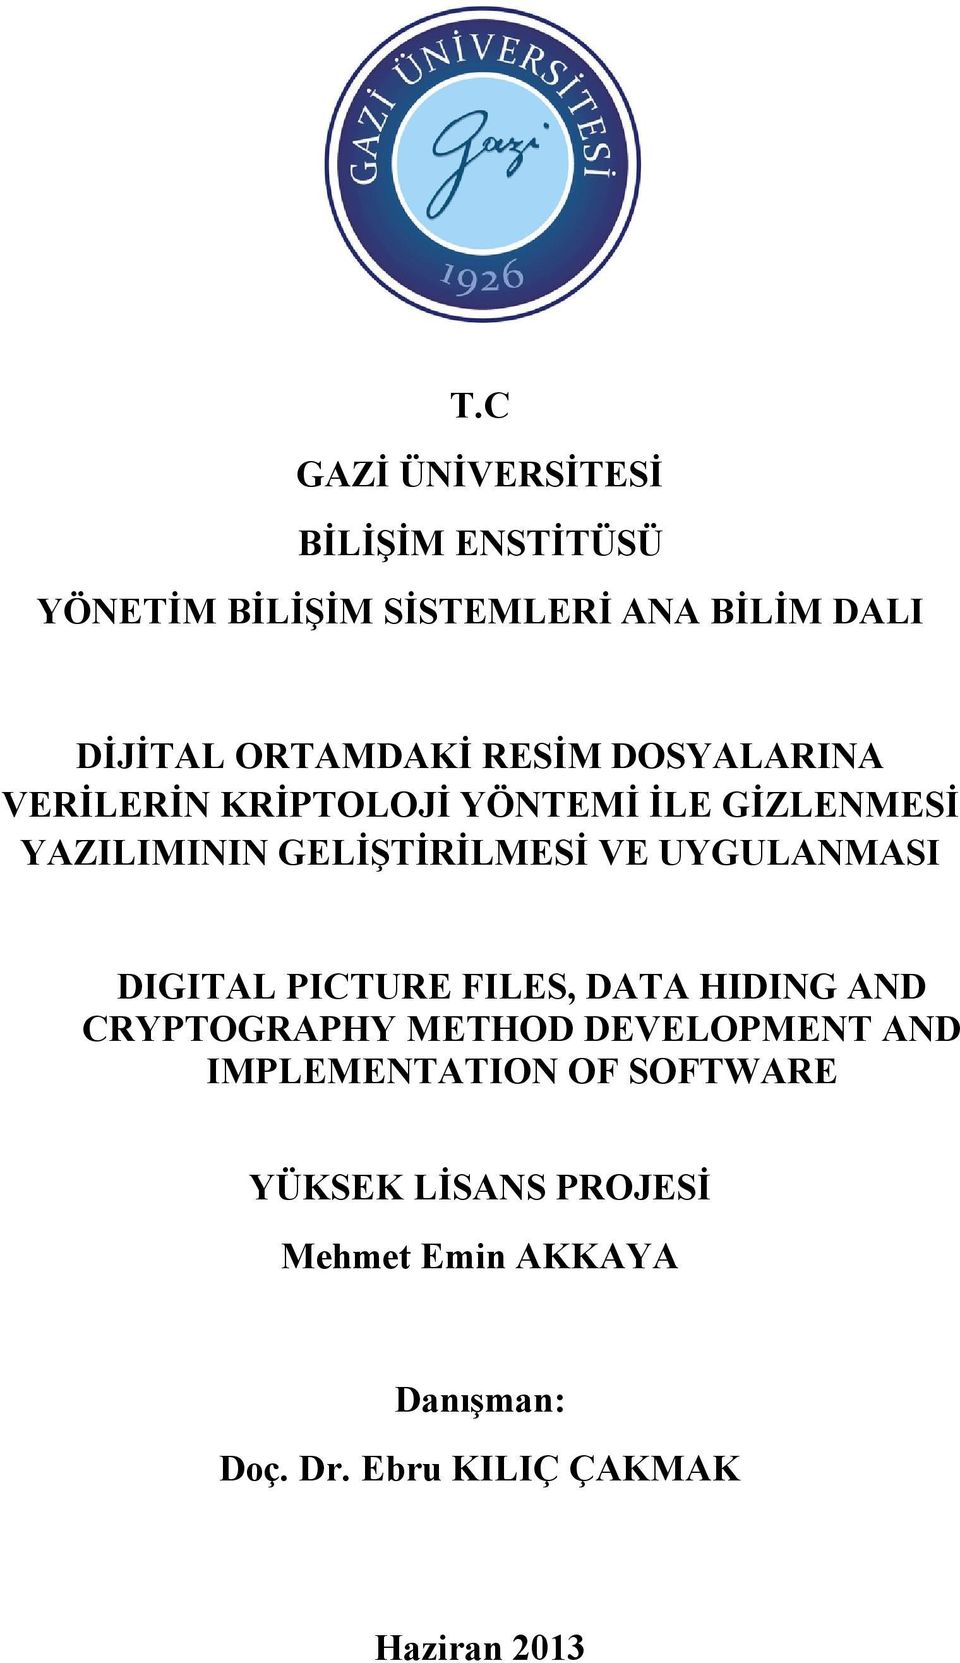 VE UYGULANMASI DIGITAL PICTURE FILES, DATA HIDING AND CRYPTOGRAPHY METHOD DEVELOPMENT AND